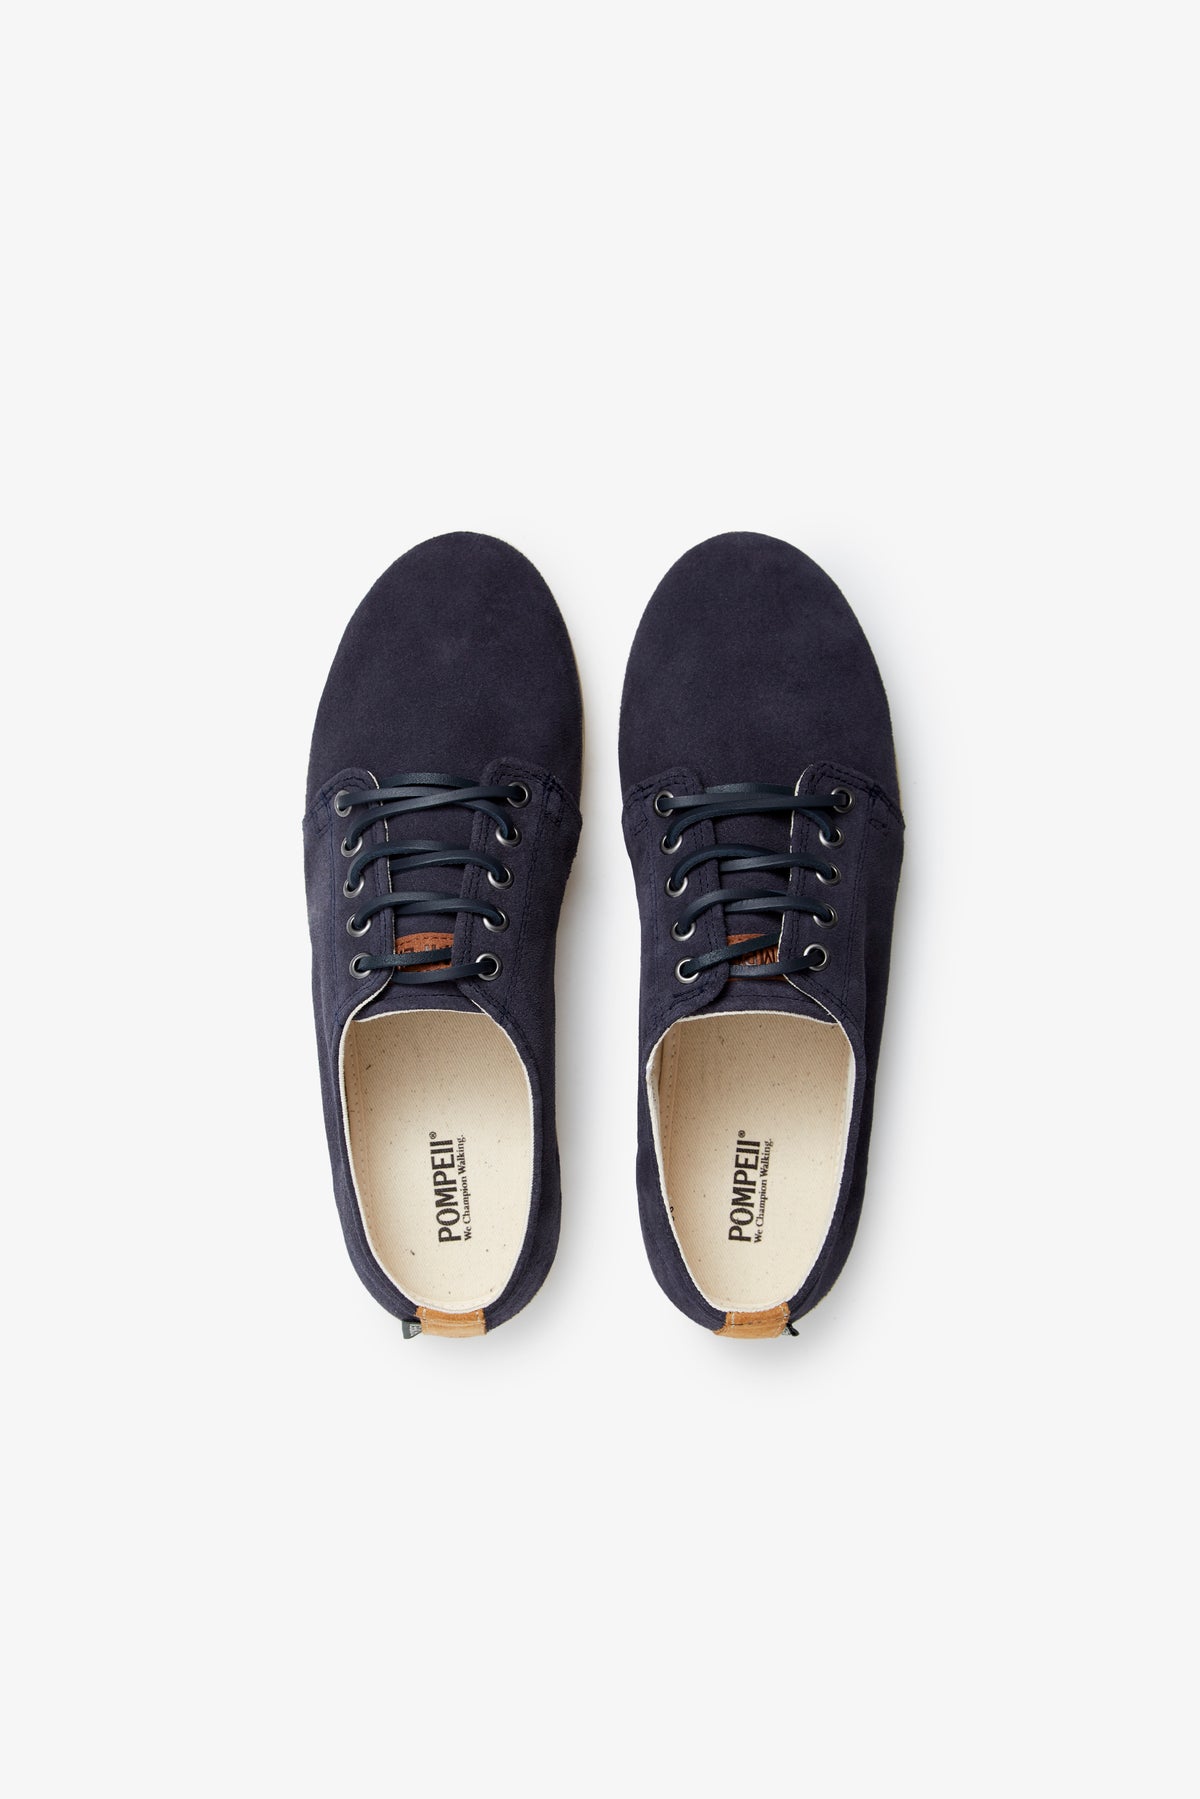 HIGBY SUEDE HYDRO NAVY YELLOW